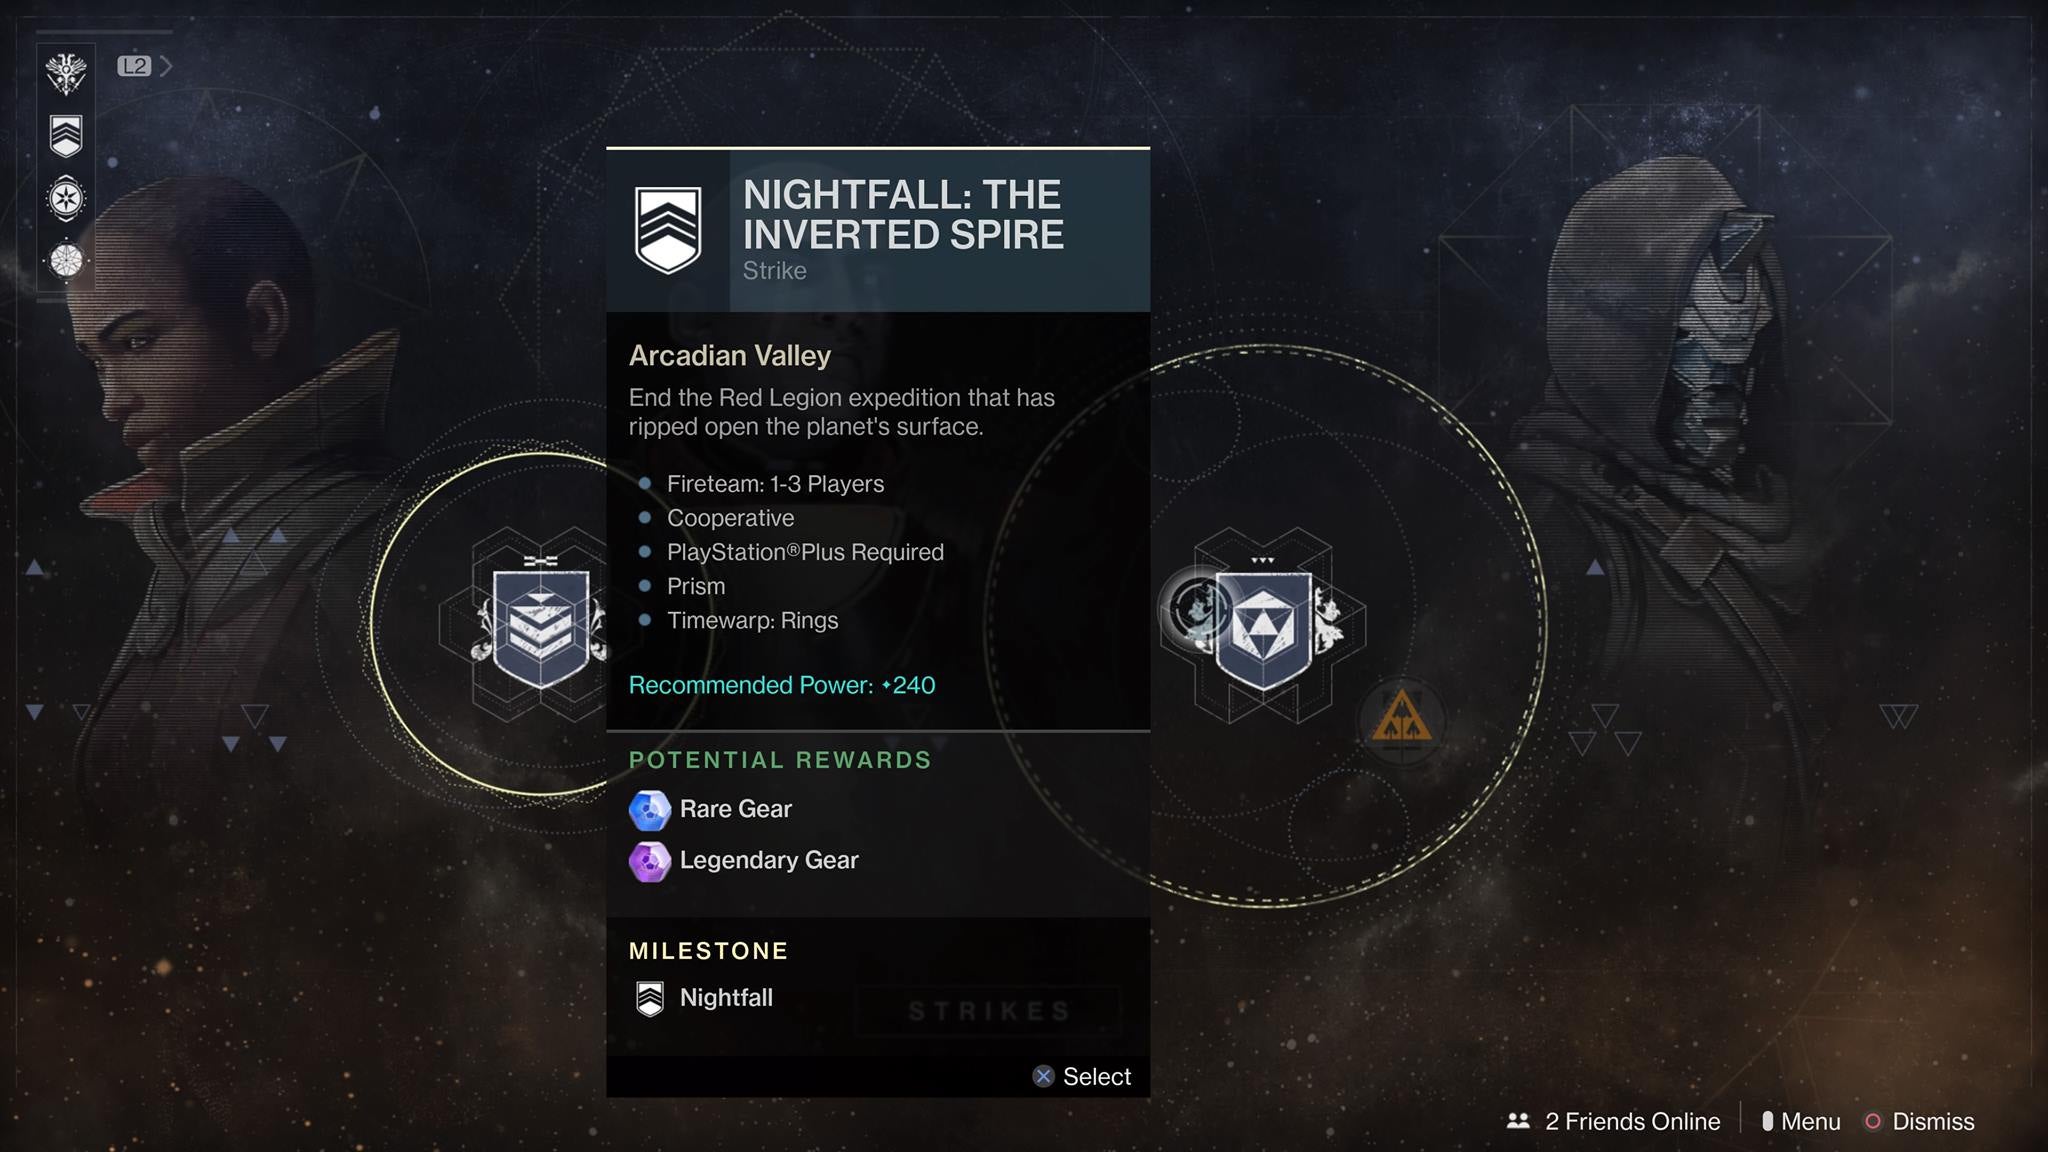 Image for Destiny 2 weekly reset for September 12 - Nightfall, Challenges, Flashpoint, Call to Arms and more detailed